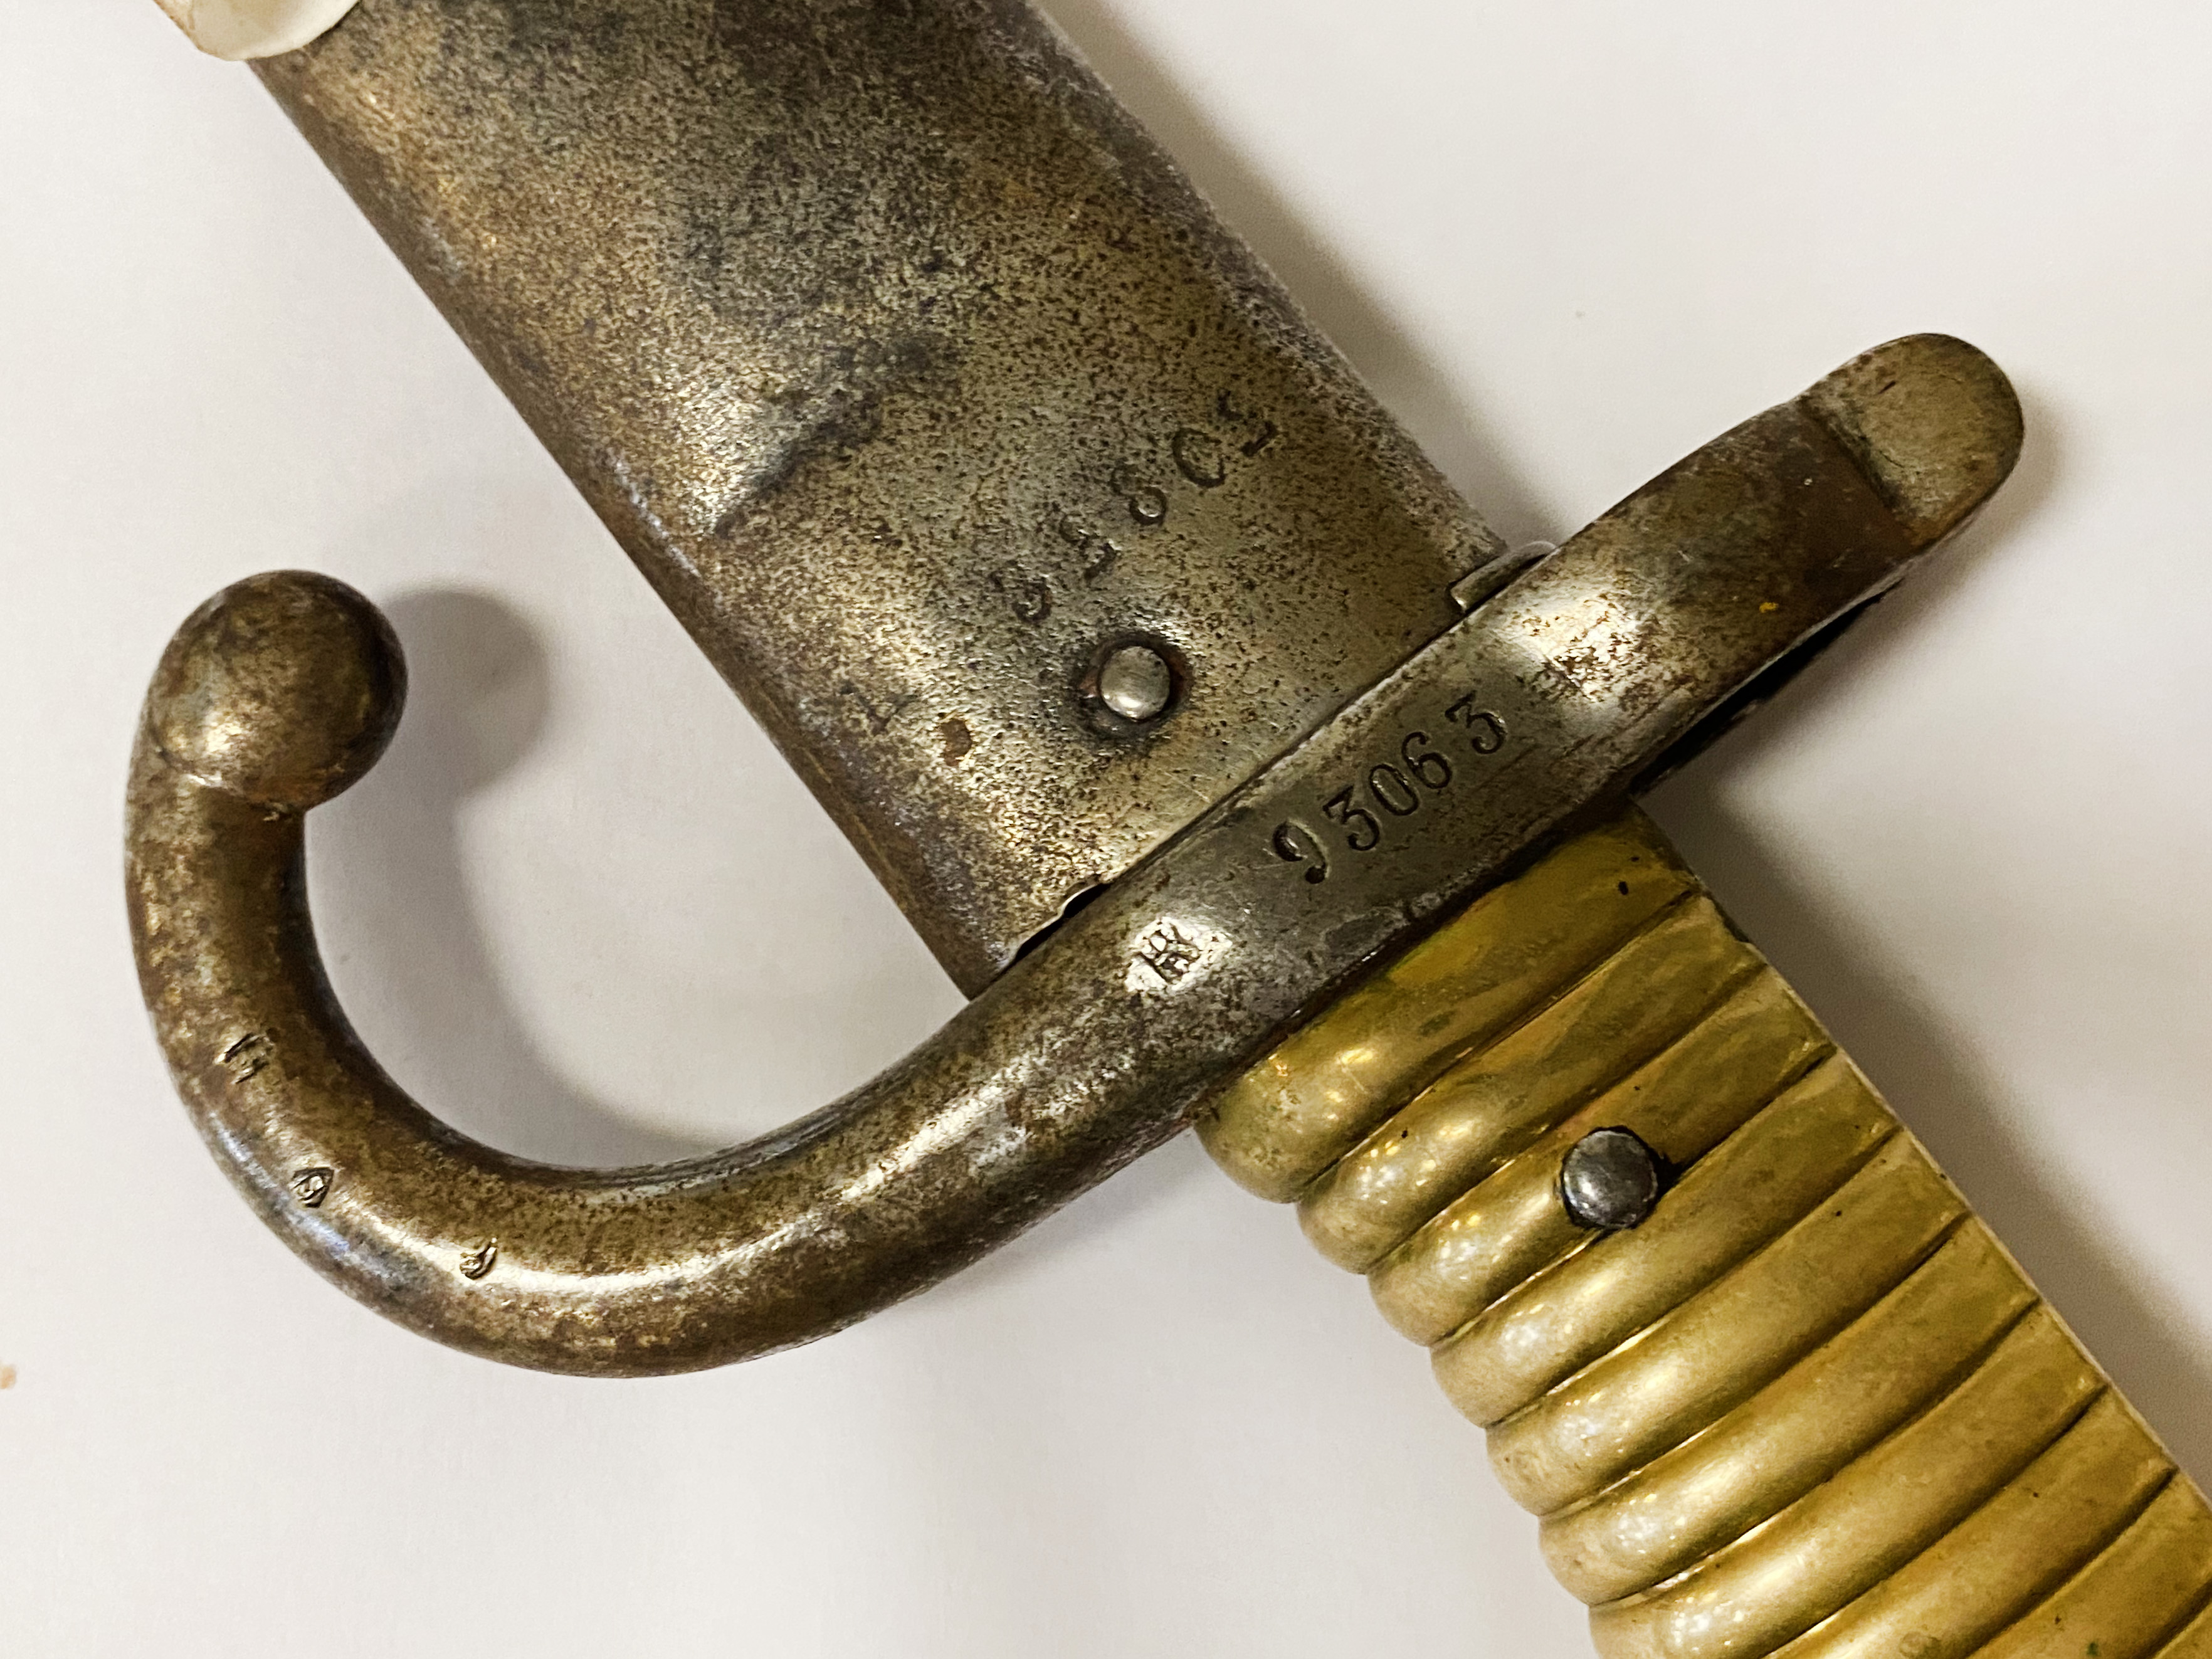 1868 PATTERN BAYONET WITH BRASS GRIP - Image 2 of 2